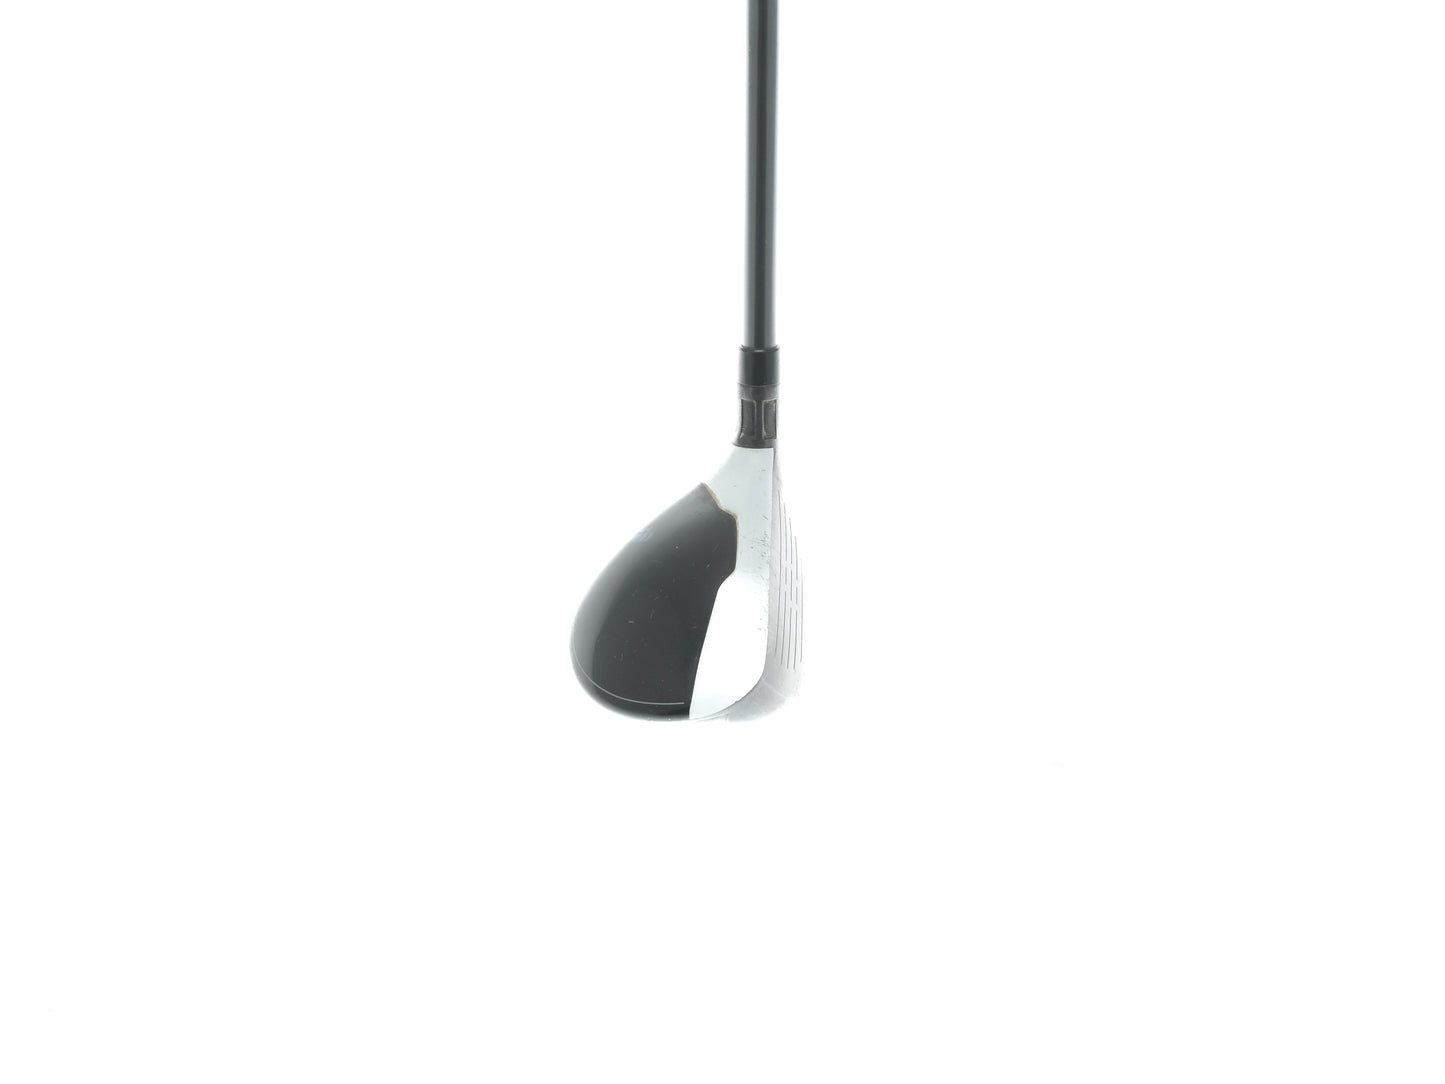 Taylormade M2 4/22